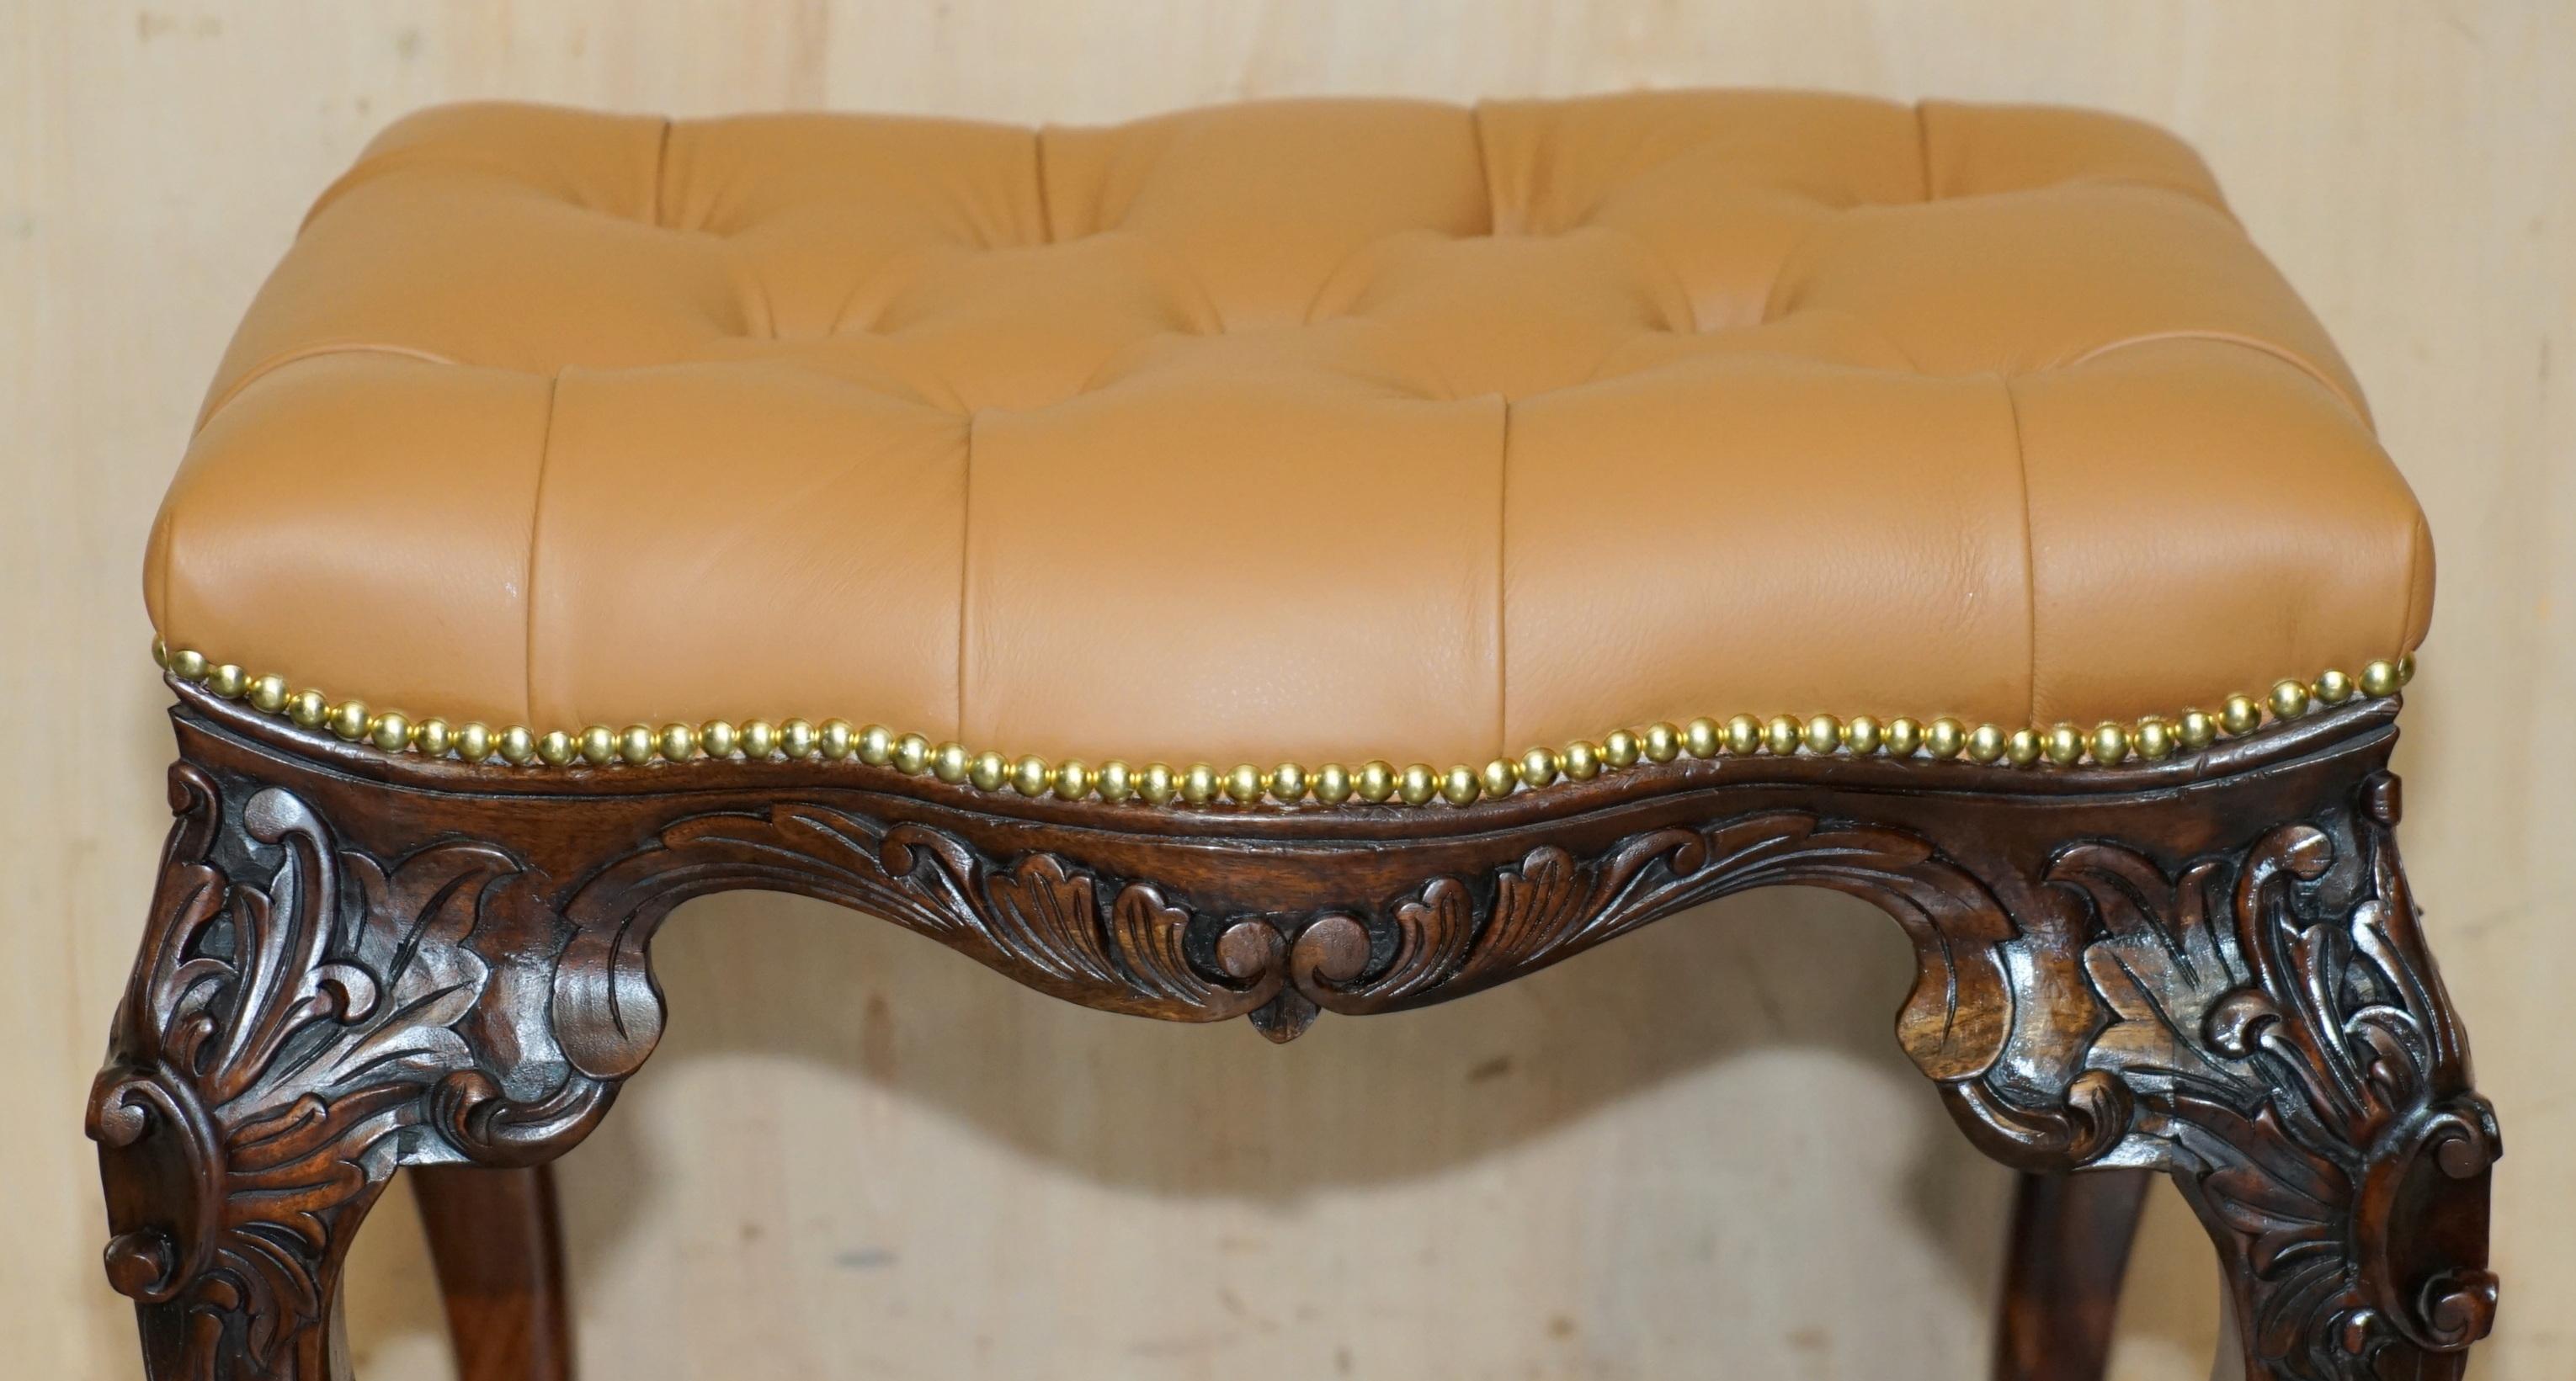 RESTORATED BROWN LEATHER CLAW & BALL CHESTERFIELD PIANO OR DRESSiNG TABLE STOOL (Englisch) im Angebot